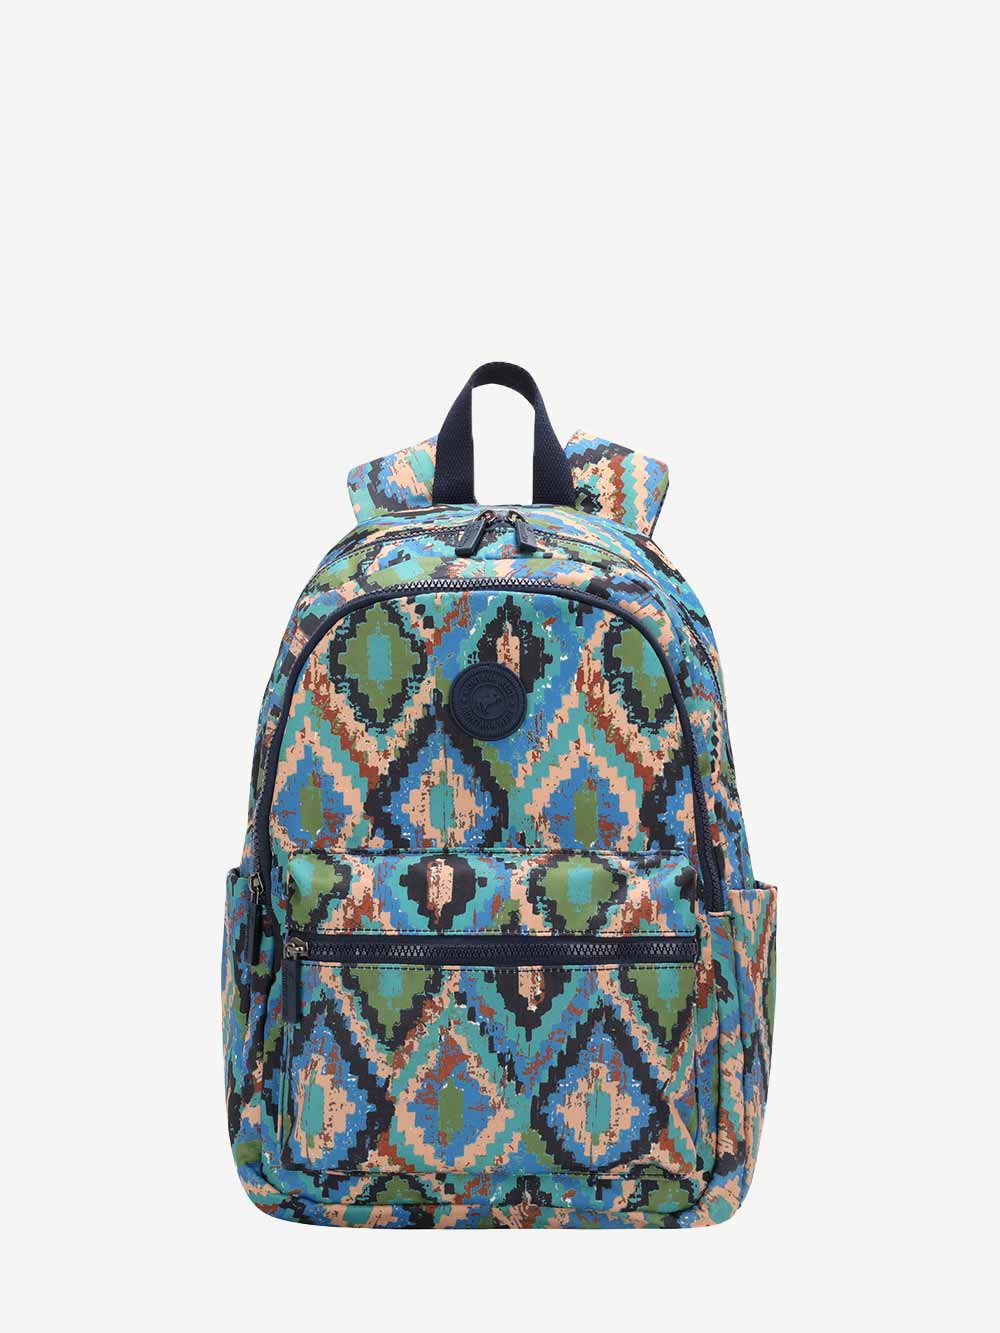 Montana West Allover Aztec Collection Backpack - Montana West World